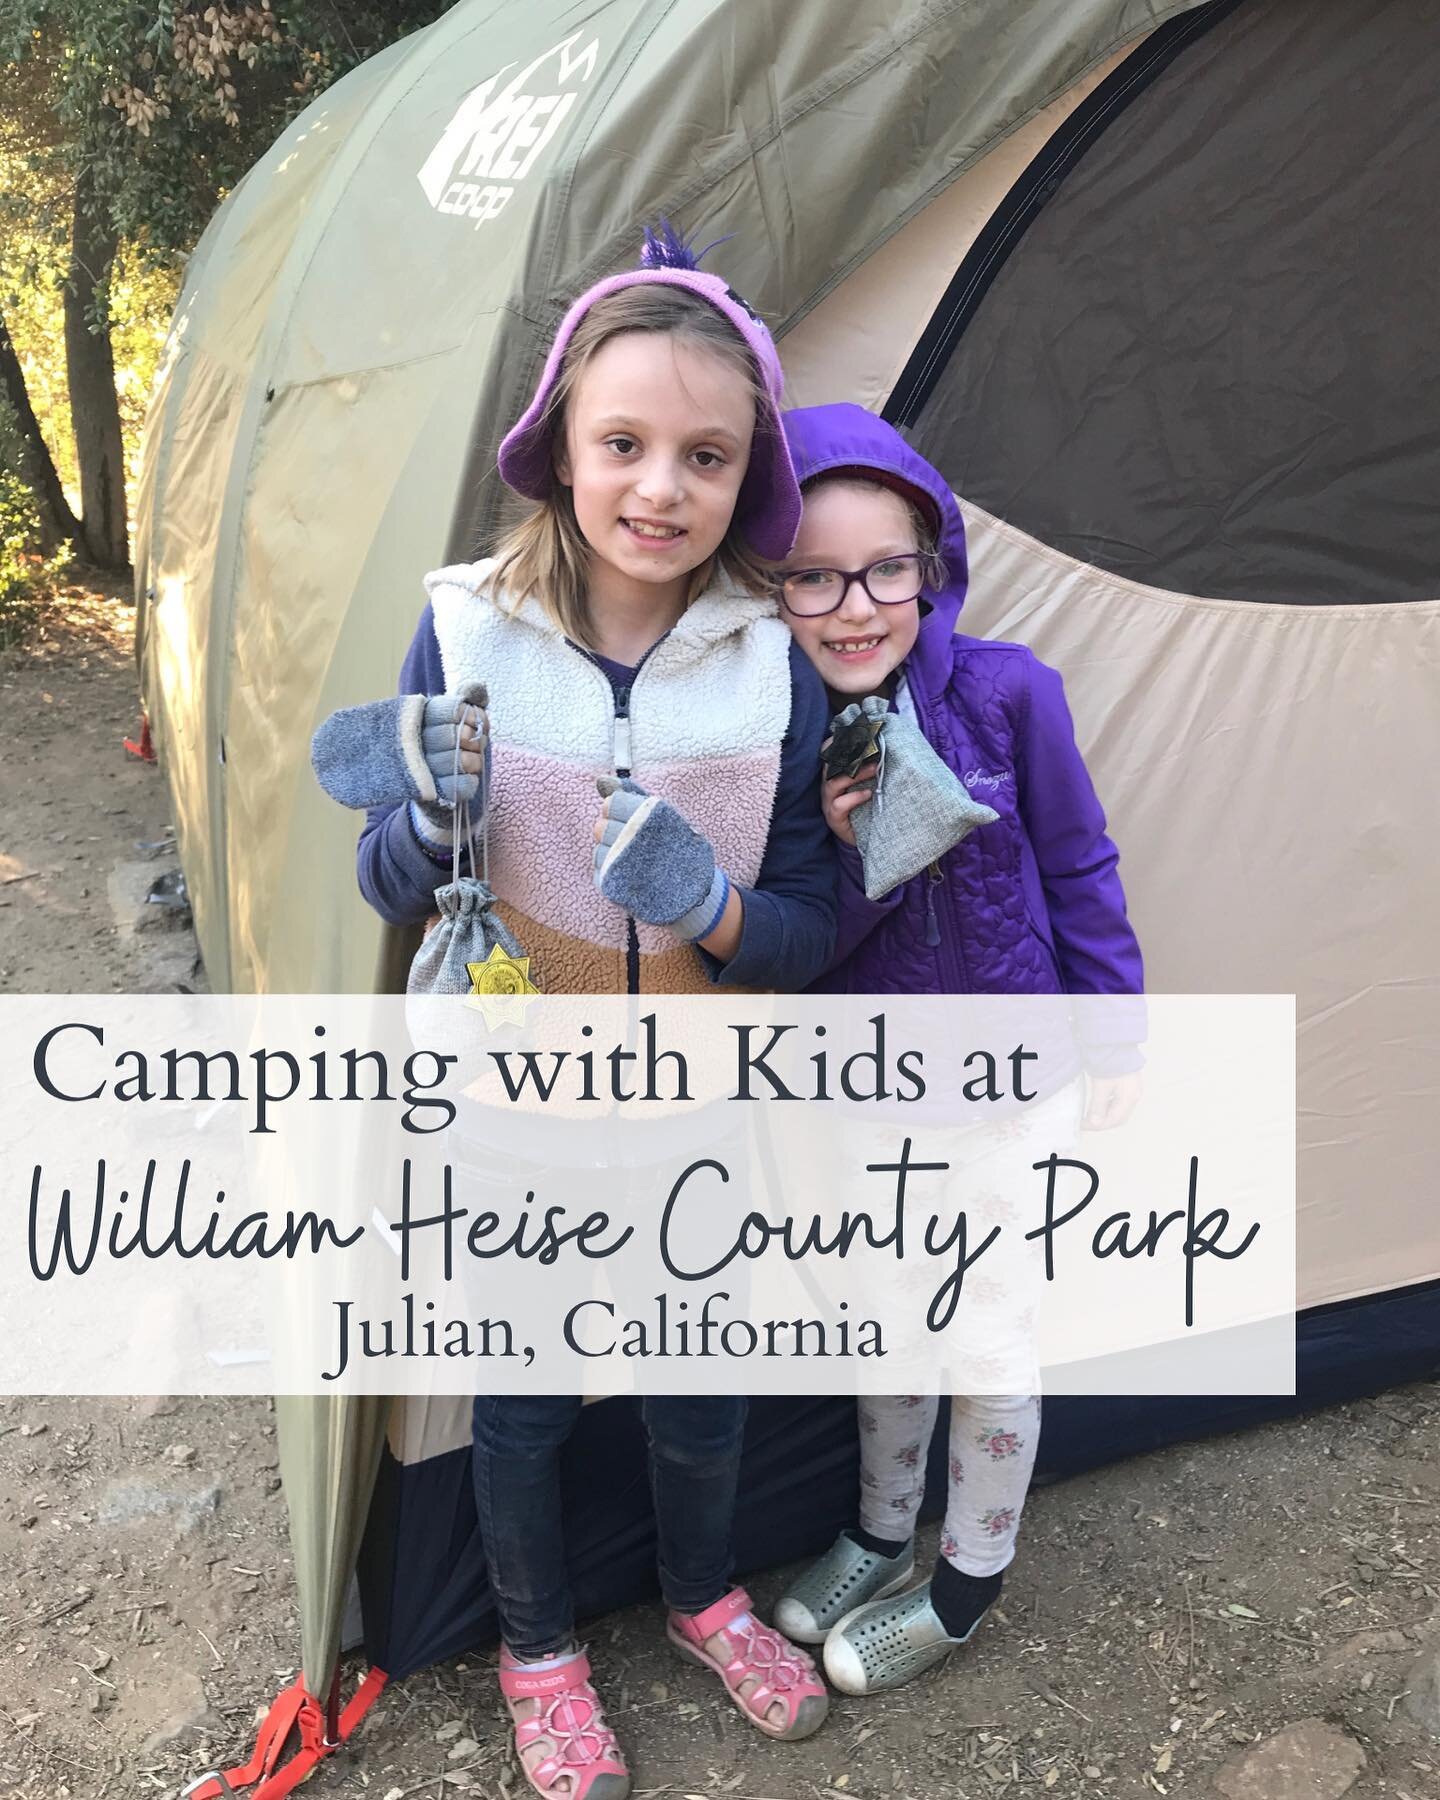 It's Camping Week here at SoCal Nature Kids! All week we'll be talking camping with children in Southern California. Where do you like to camp in Southern California? Please share in the comments!

I wanted to start off by sharing one of our fave SoC